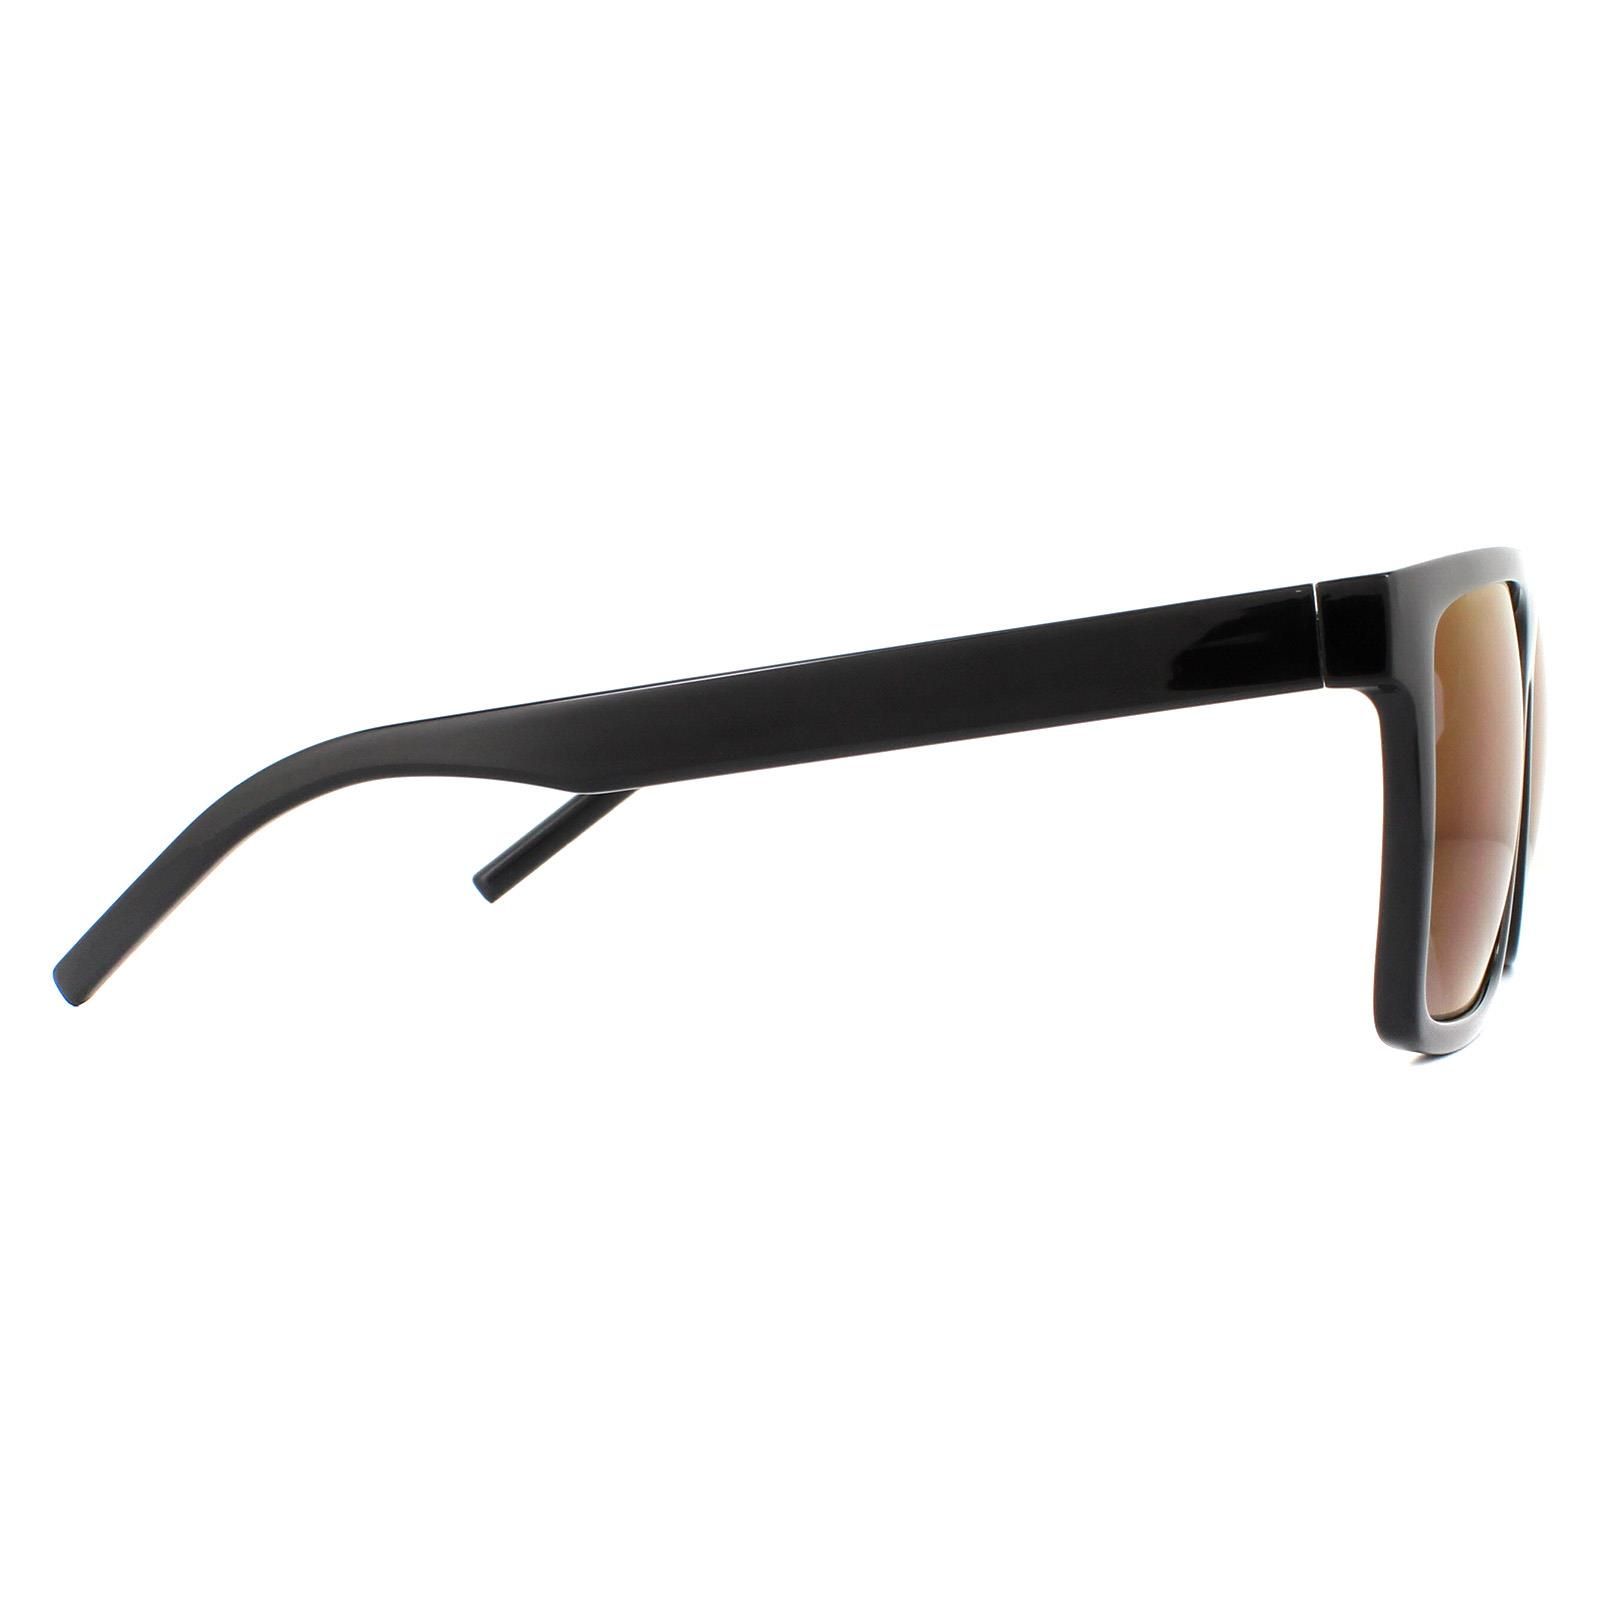 Hugo by Hugo Boss Sunglasses 1069/S 807 AO Black Red are a large square design made from lightweight acetate. The flat frame top creates a contemporary feel and the temples feature the Hugo logo.